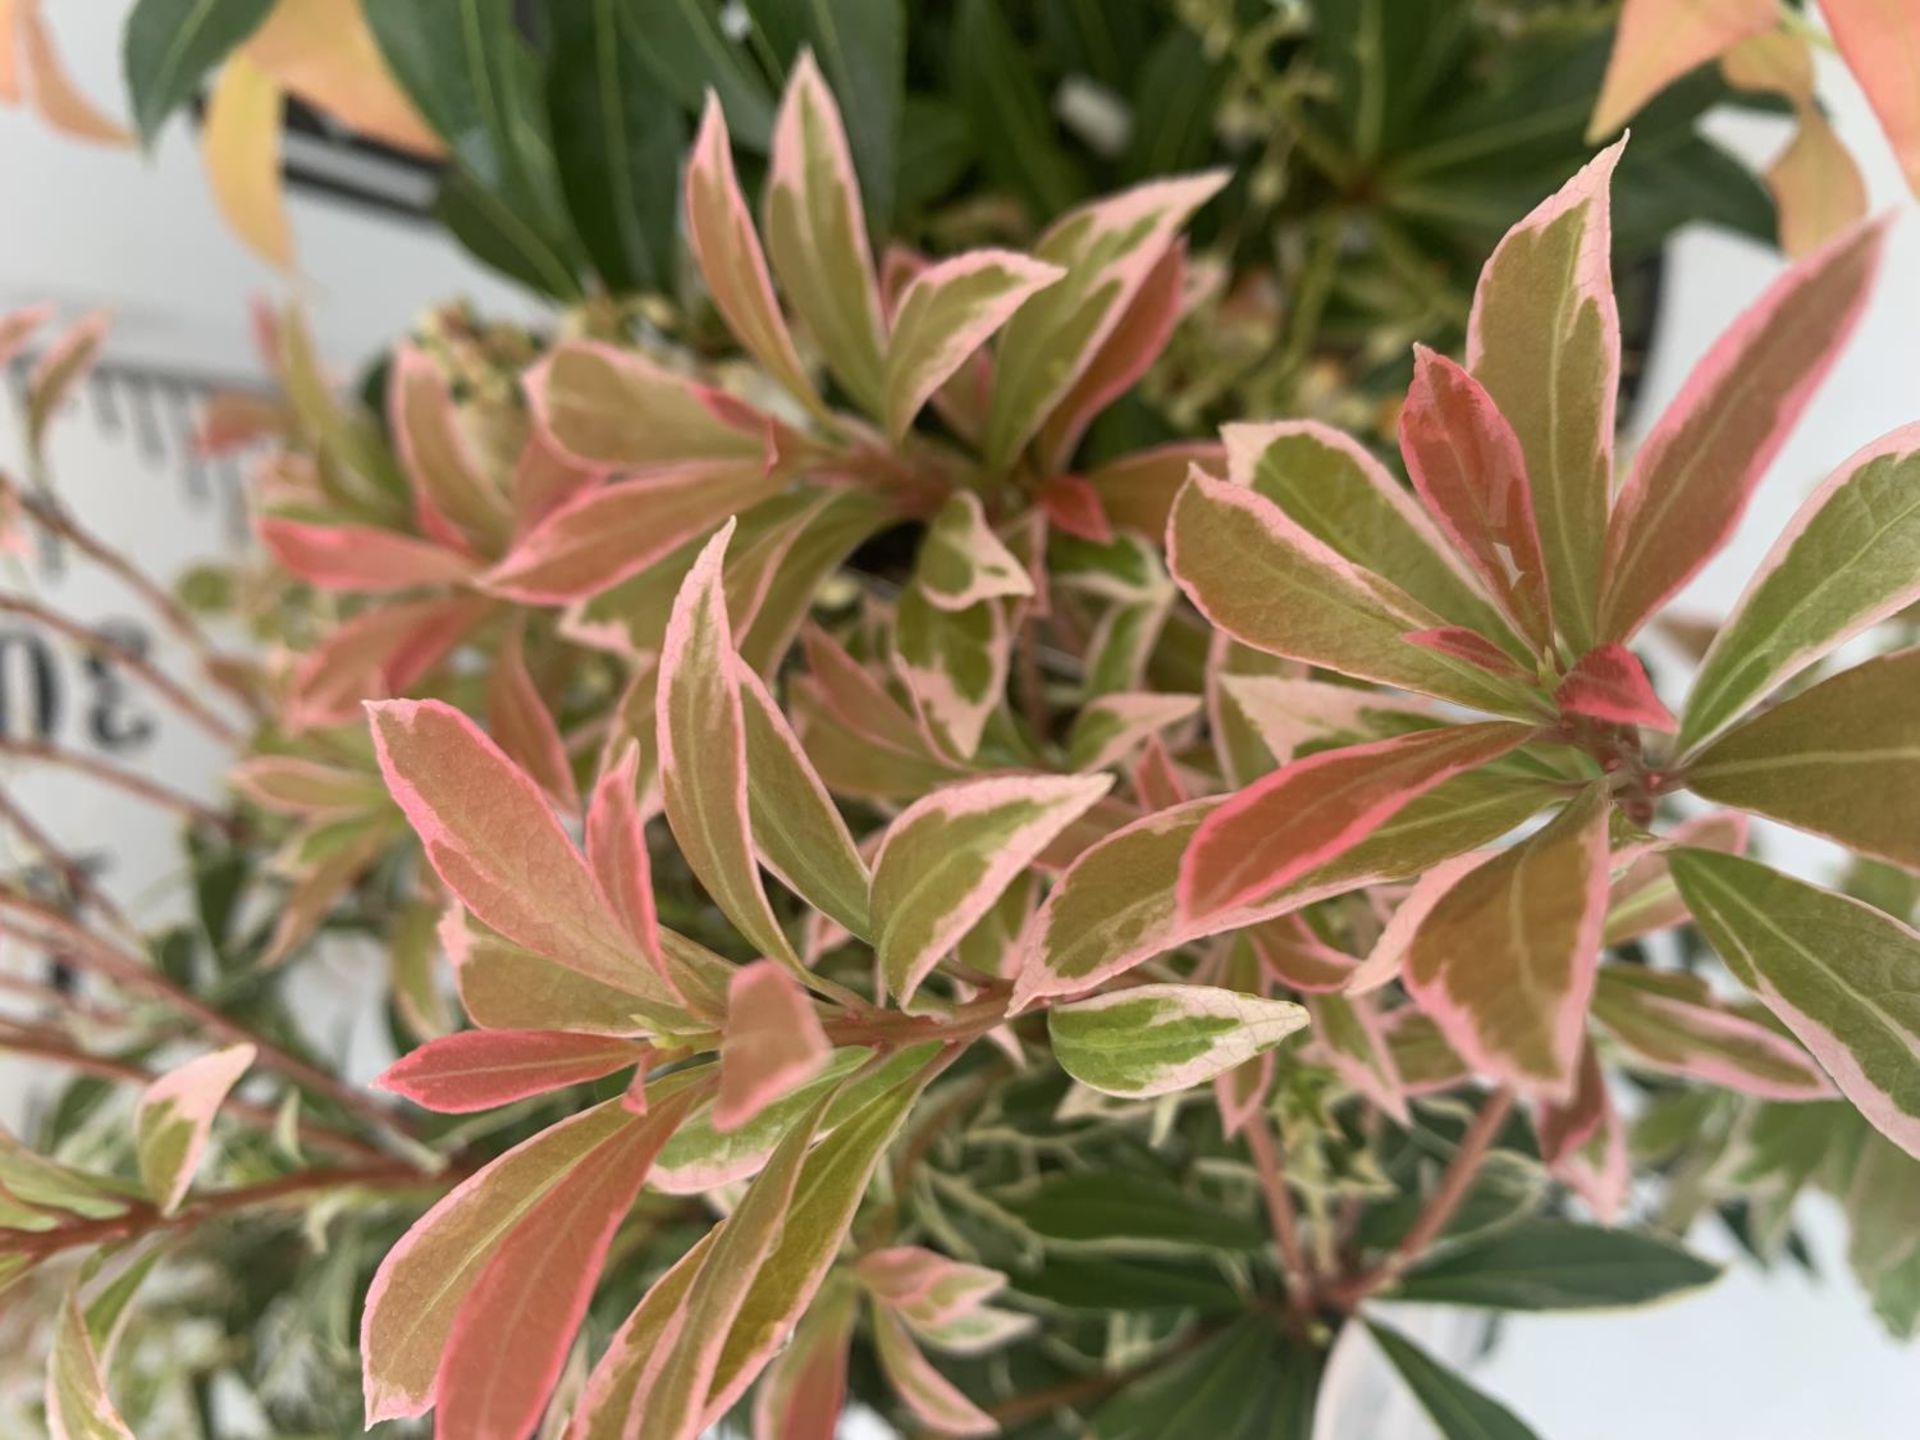 TWO PIERIS JAPONICA 'LITTLE HEATH' AND 'FOREST FLAME' IN 3 LTR POTS 55CM TALL PLUS VAT TO BE SOLD - Image 3 of 6